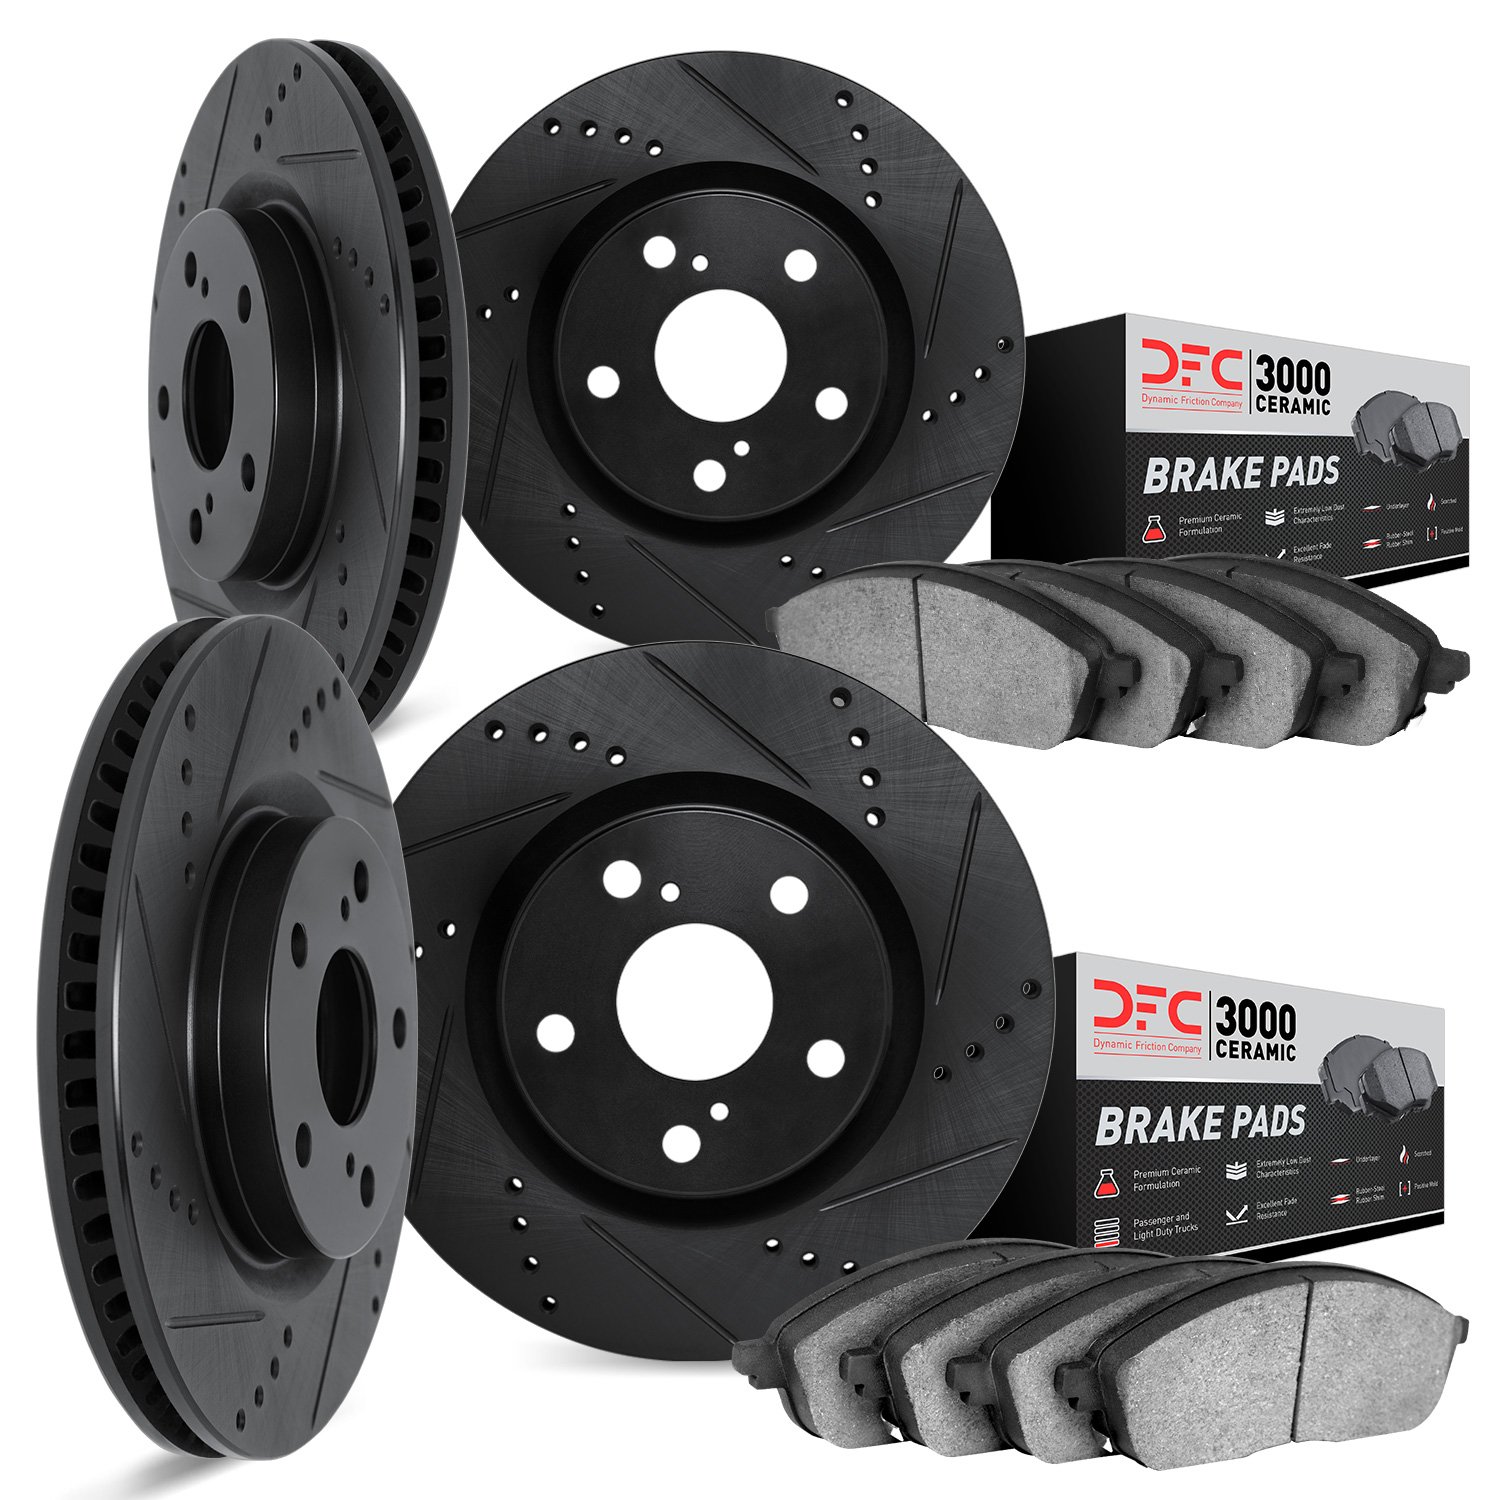 8304-31061 Drilled/Slotted Brake Rotors with 3000-Series Ceramic Brake Pads Kit [Black], 2011-2012 BMW, Position: Front and Rear